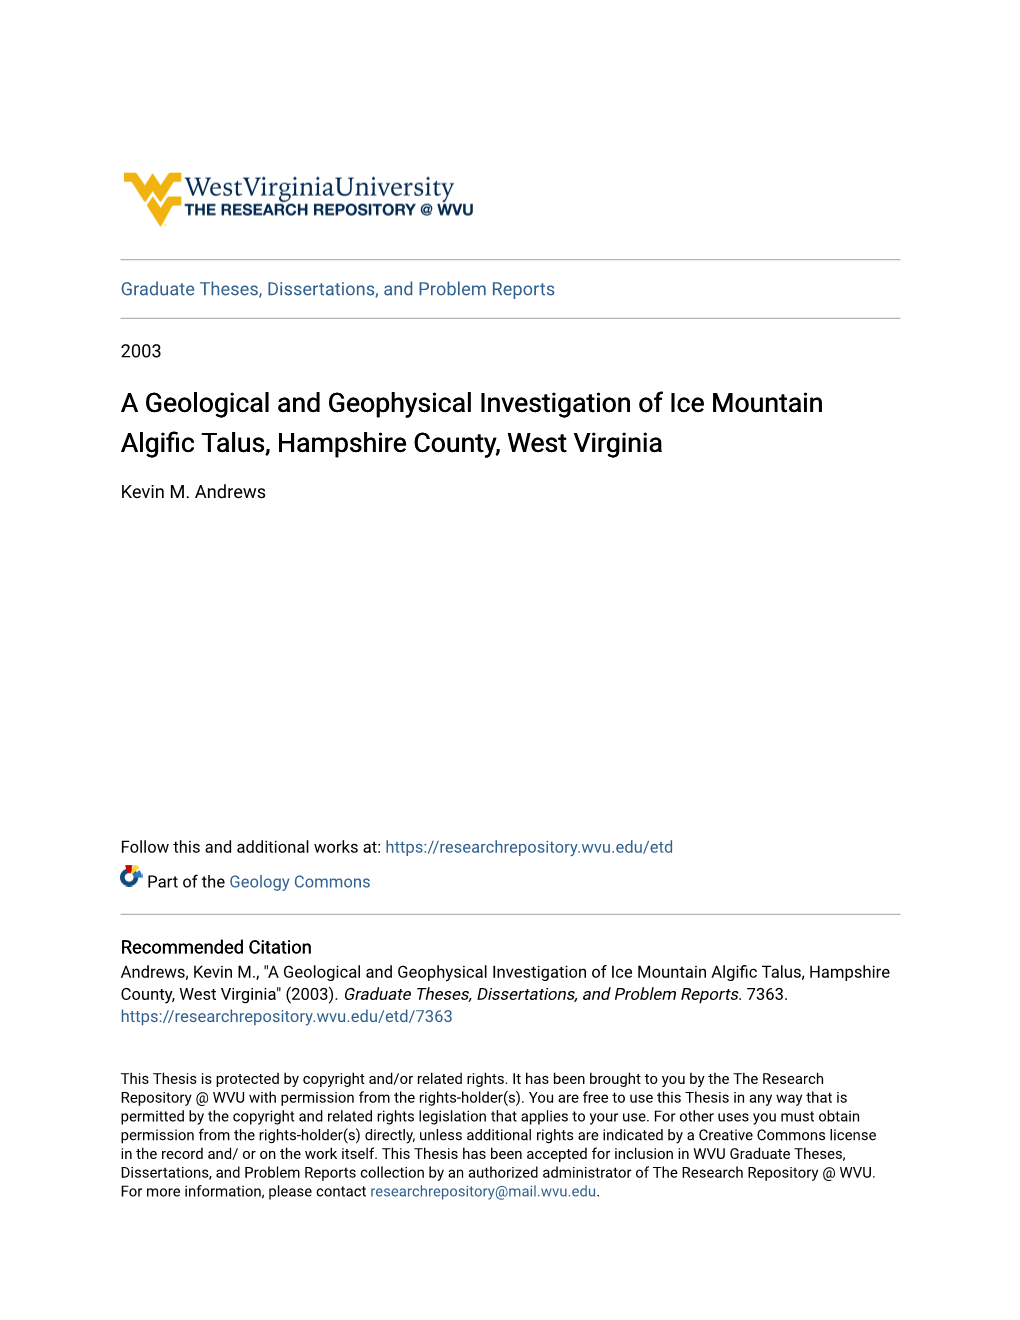 A Geological and Geophysical Investigation of Ice Mountain Algific Alus,T Hampshire County, West Virginia